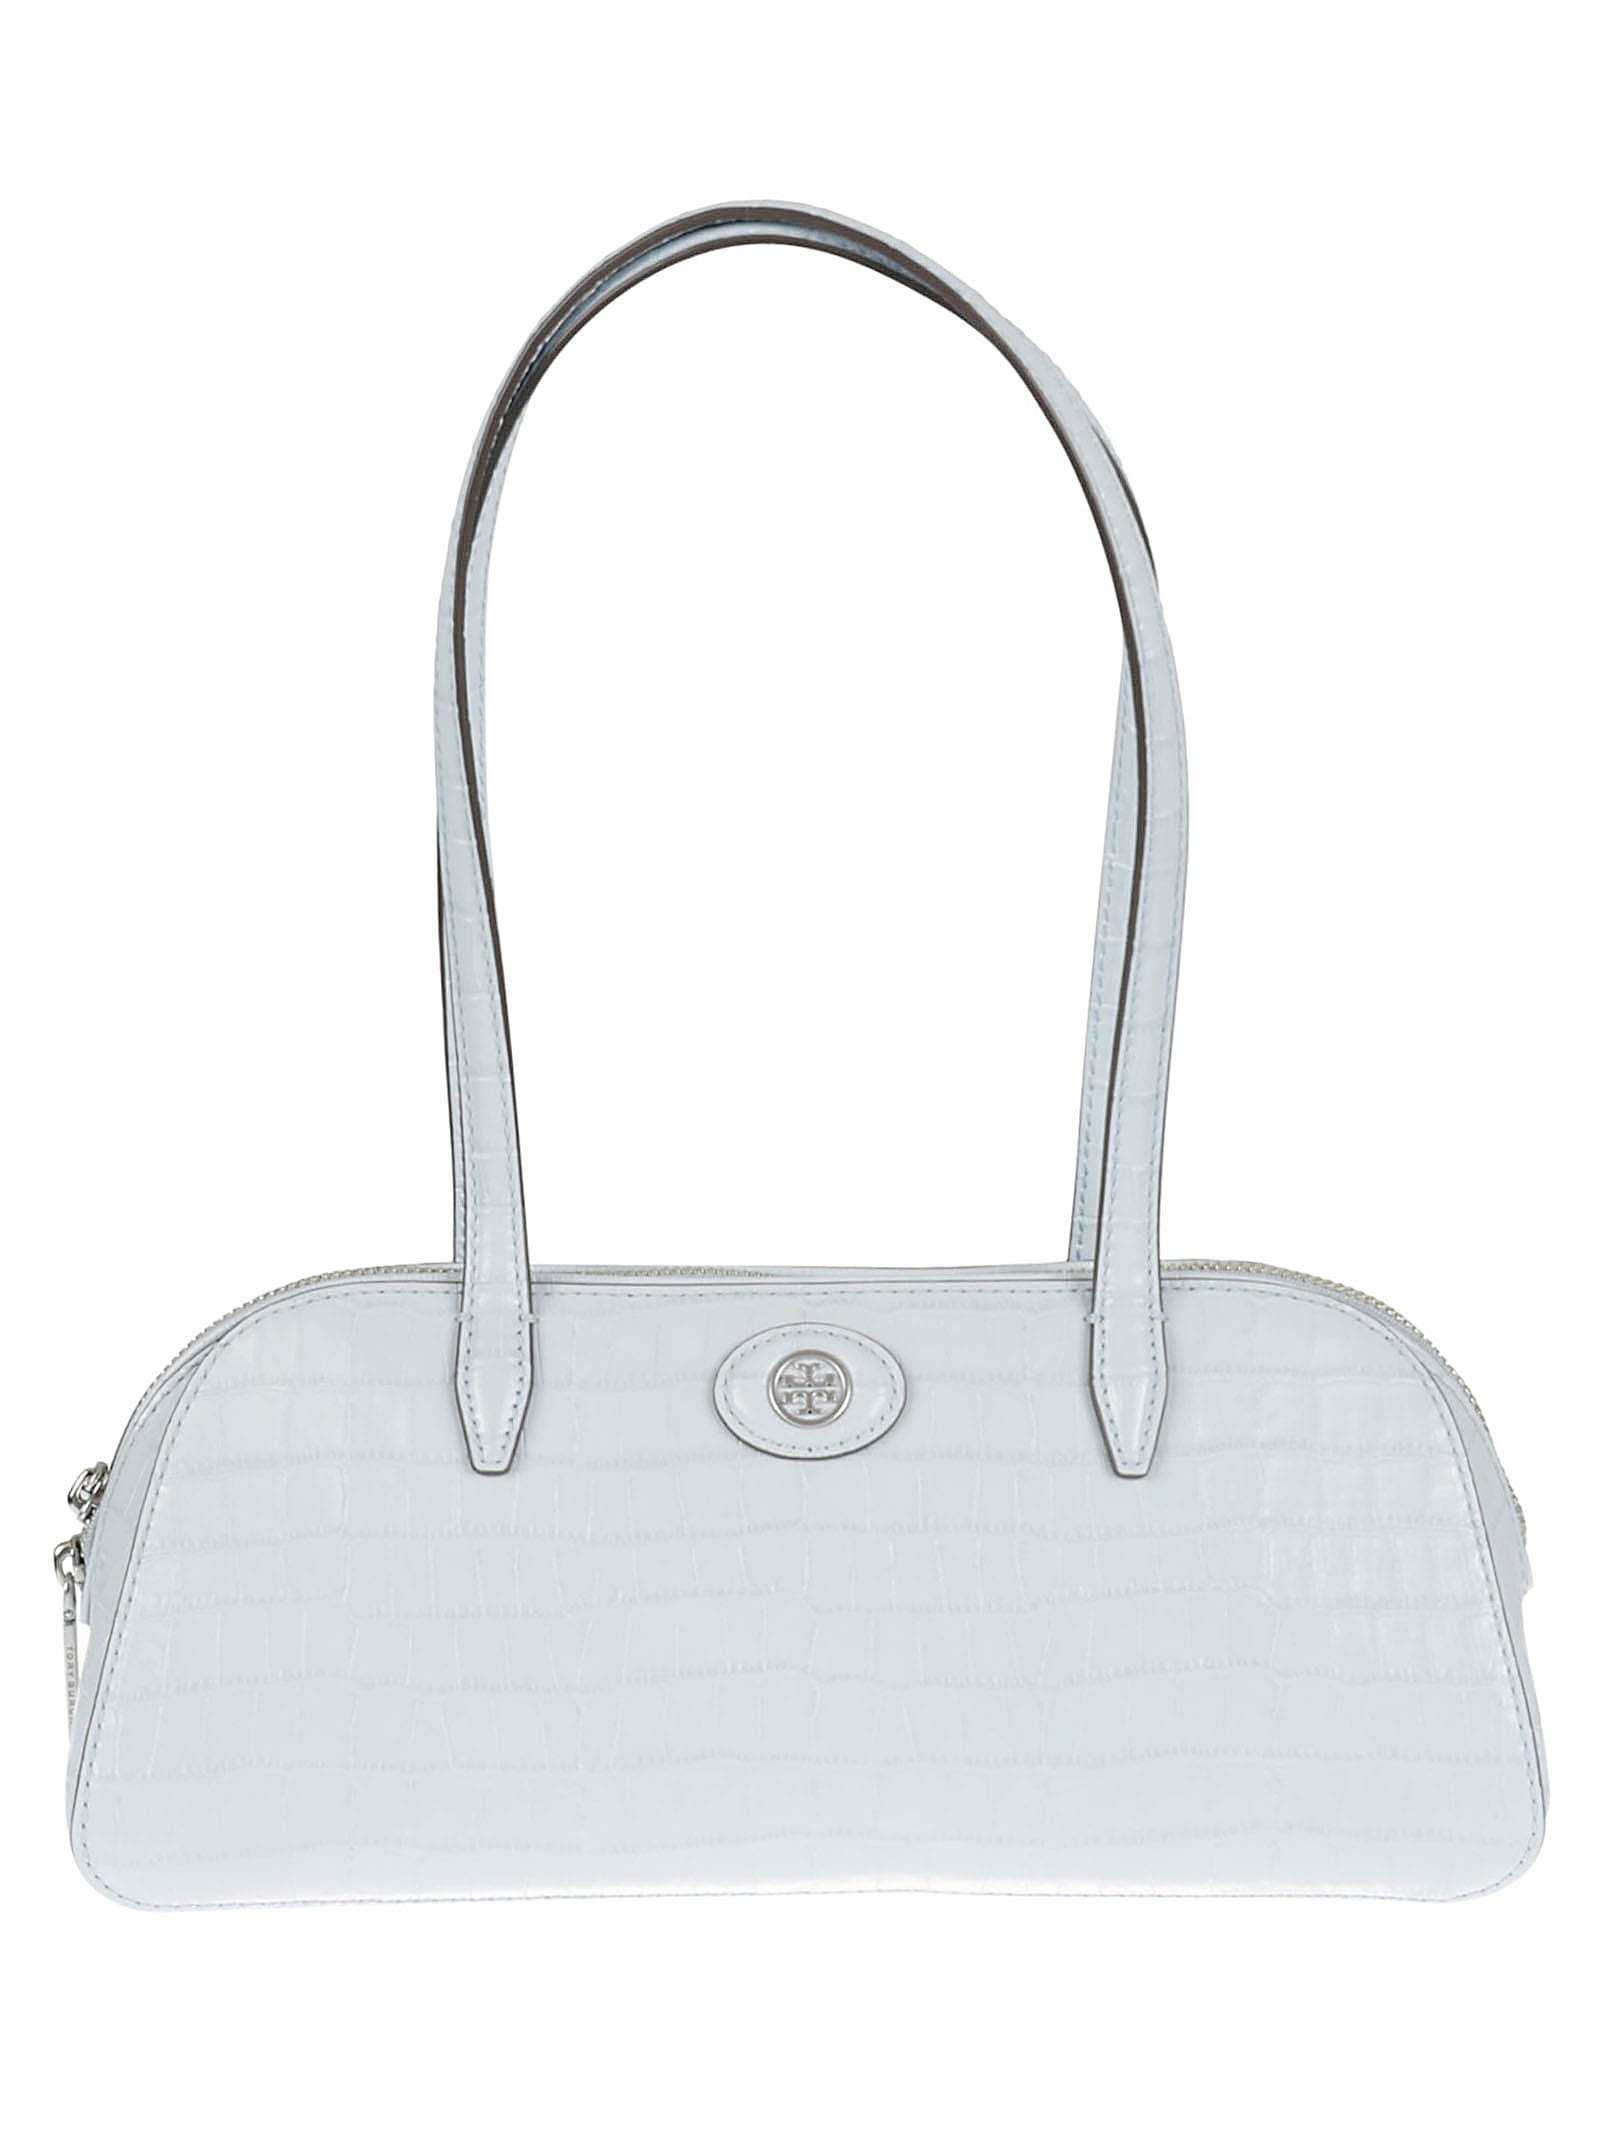 Tory Burch Robinson Embossed Small Tote | italist